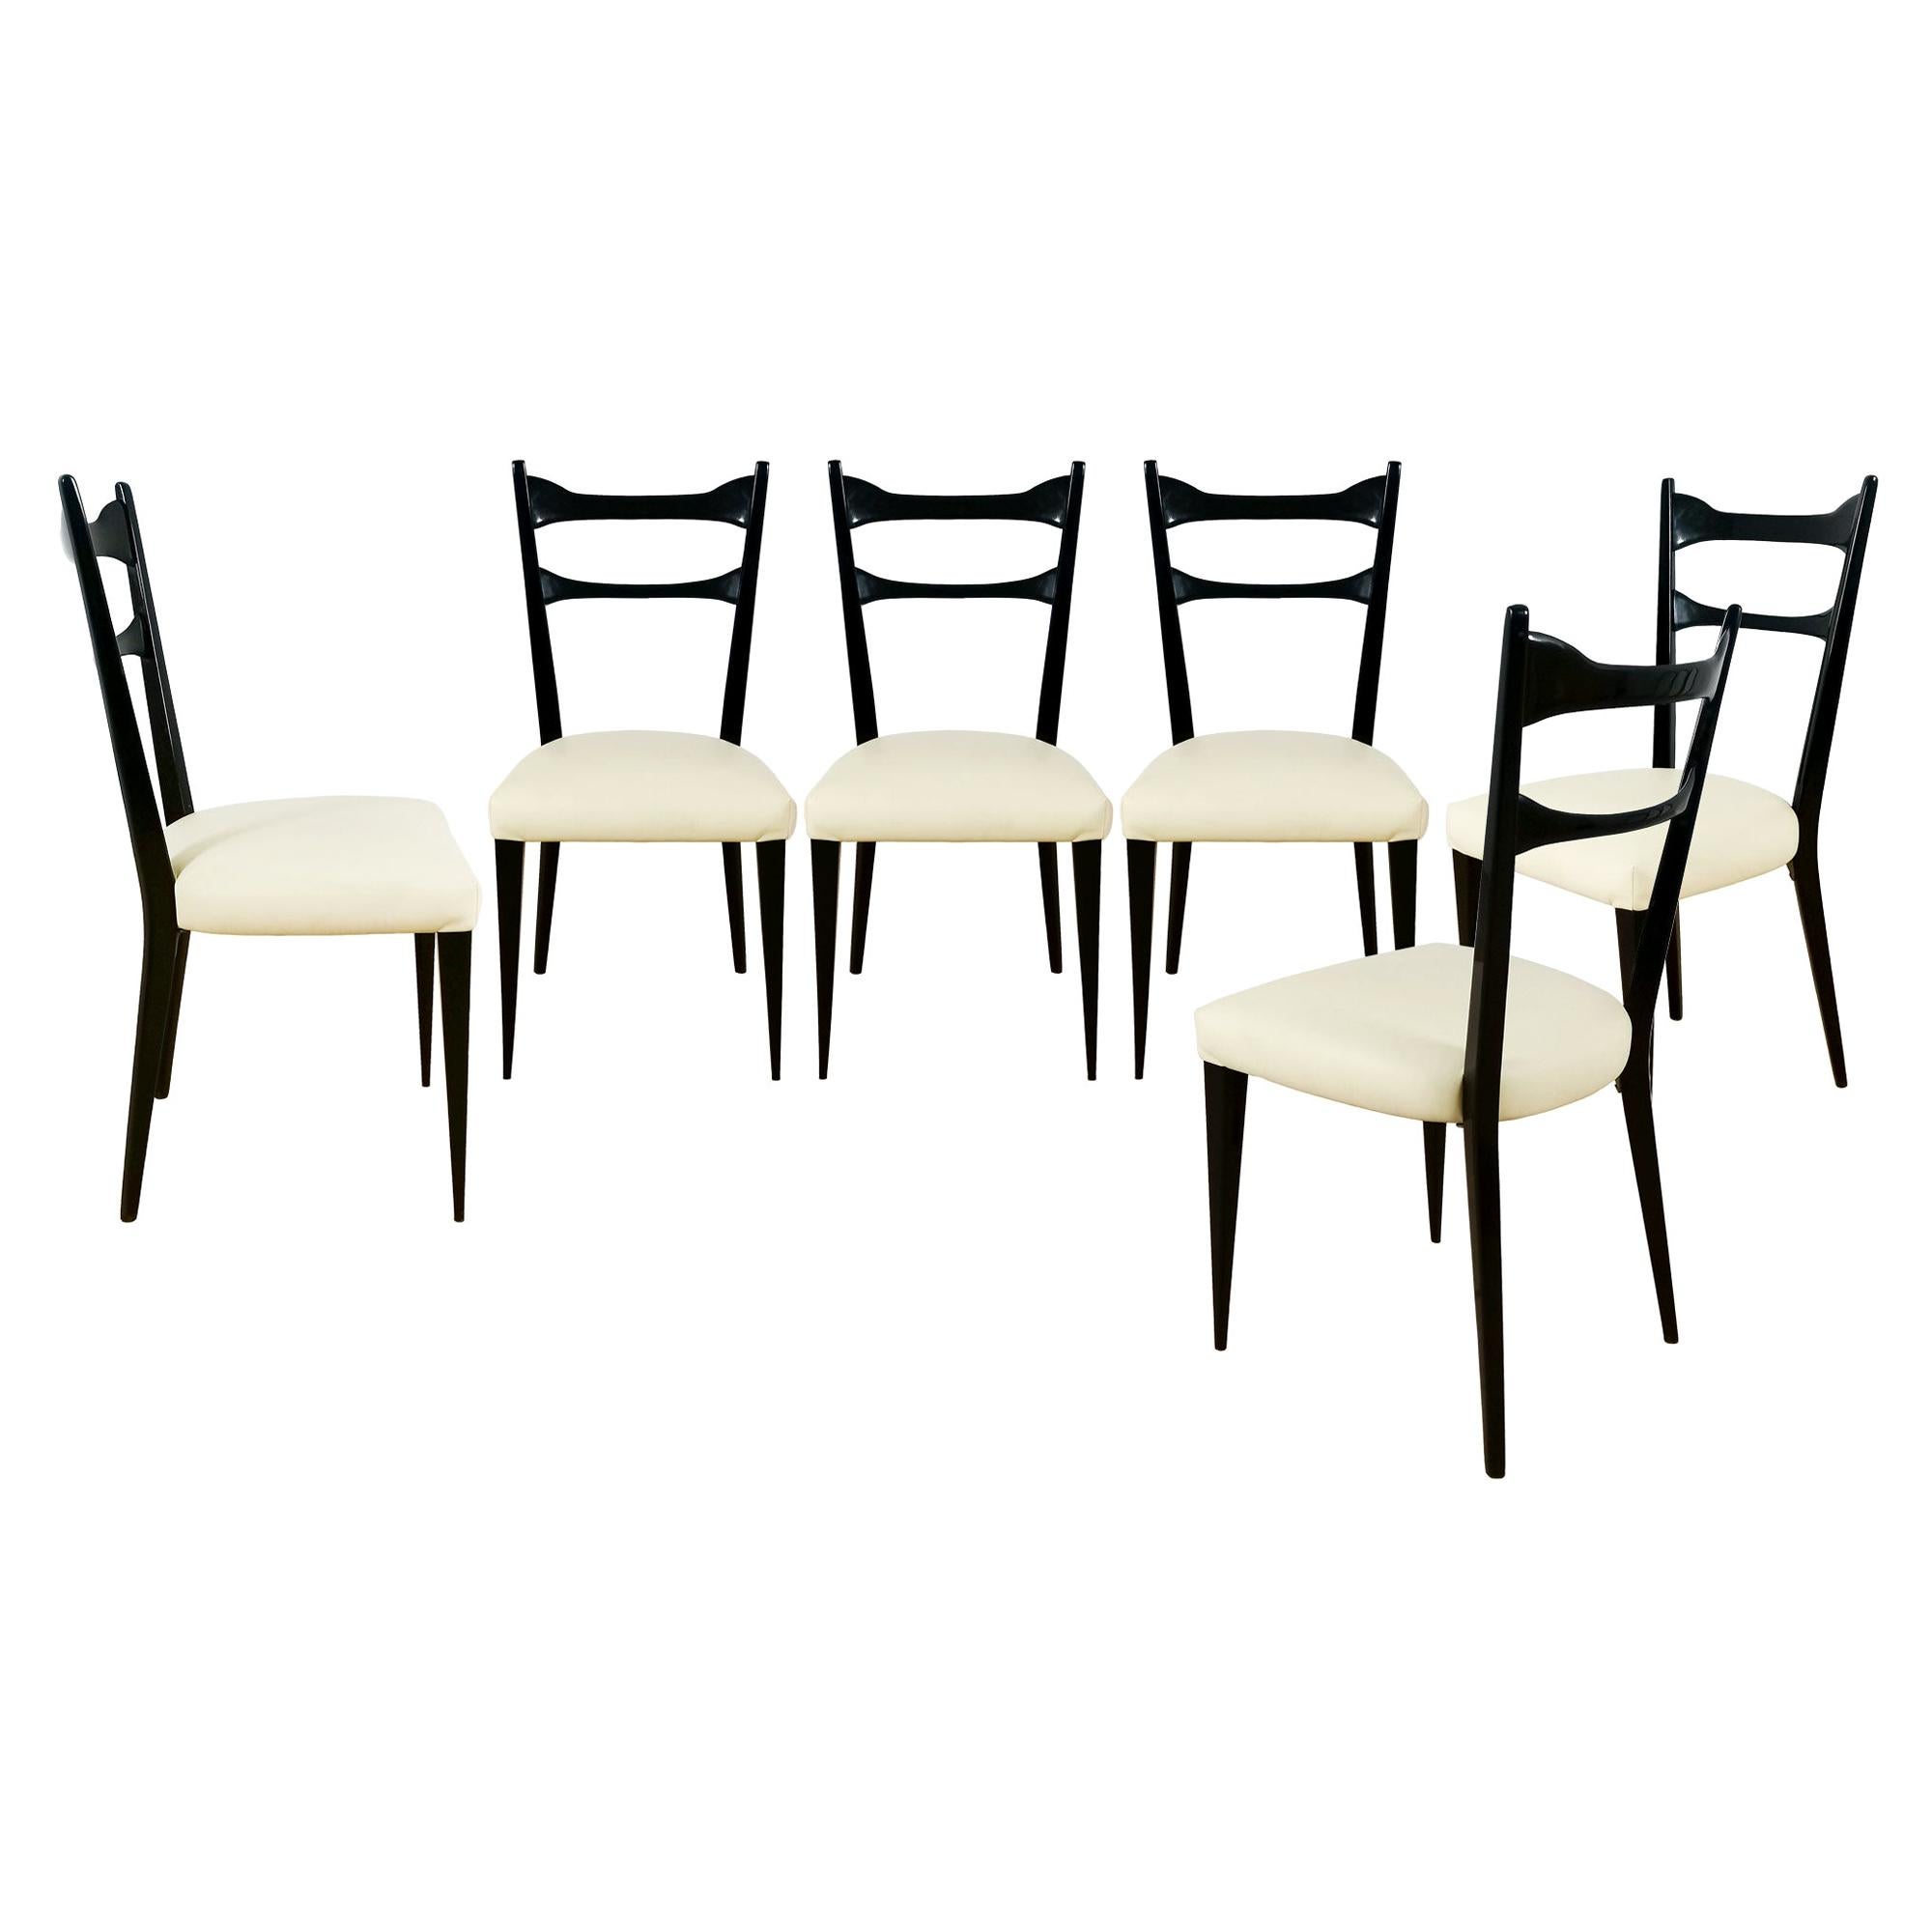 Set of Six Mid-Century Modern Chairs in Beech and Ivory Leather - Italy For Sale